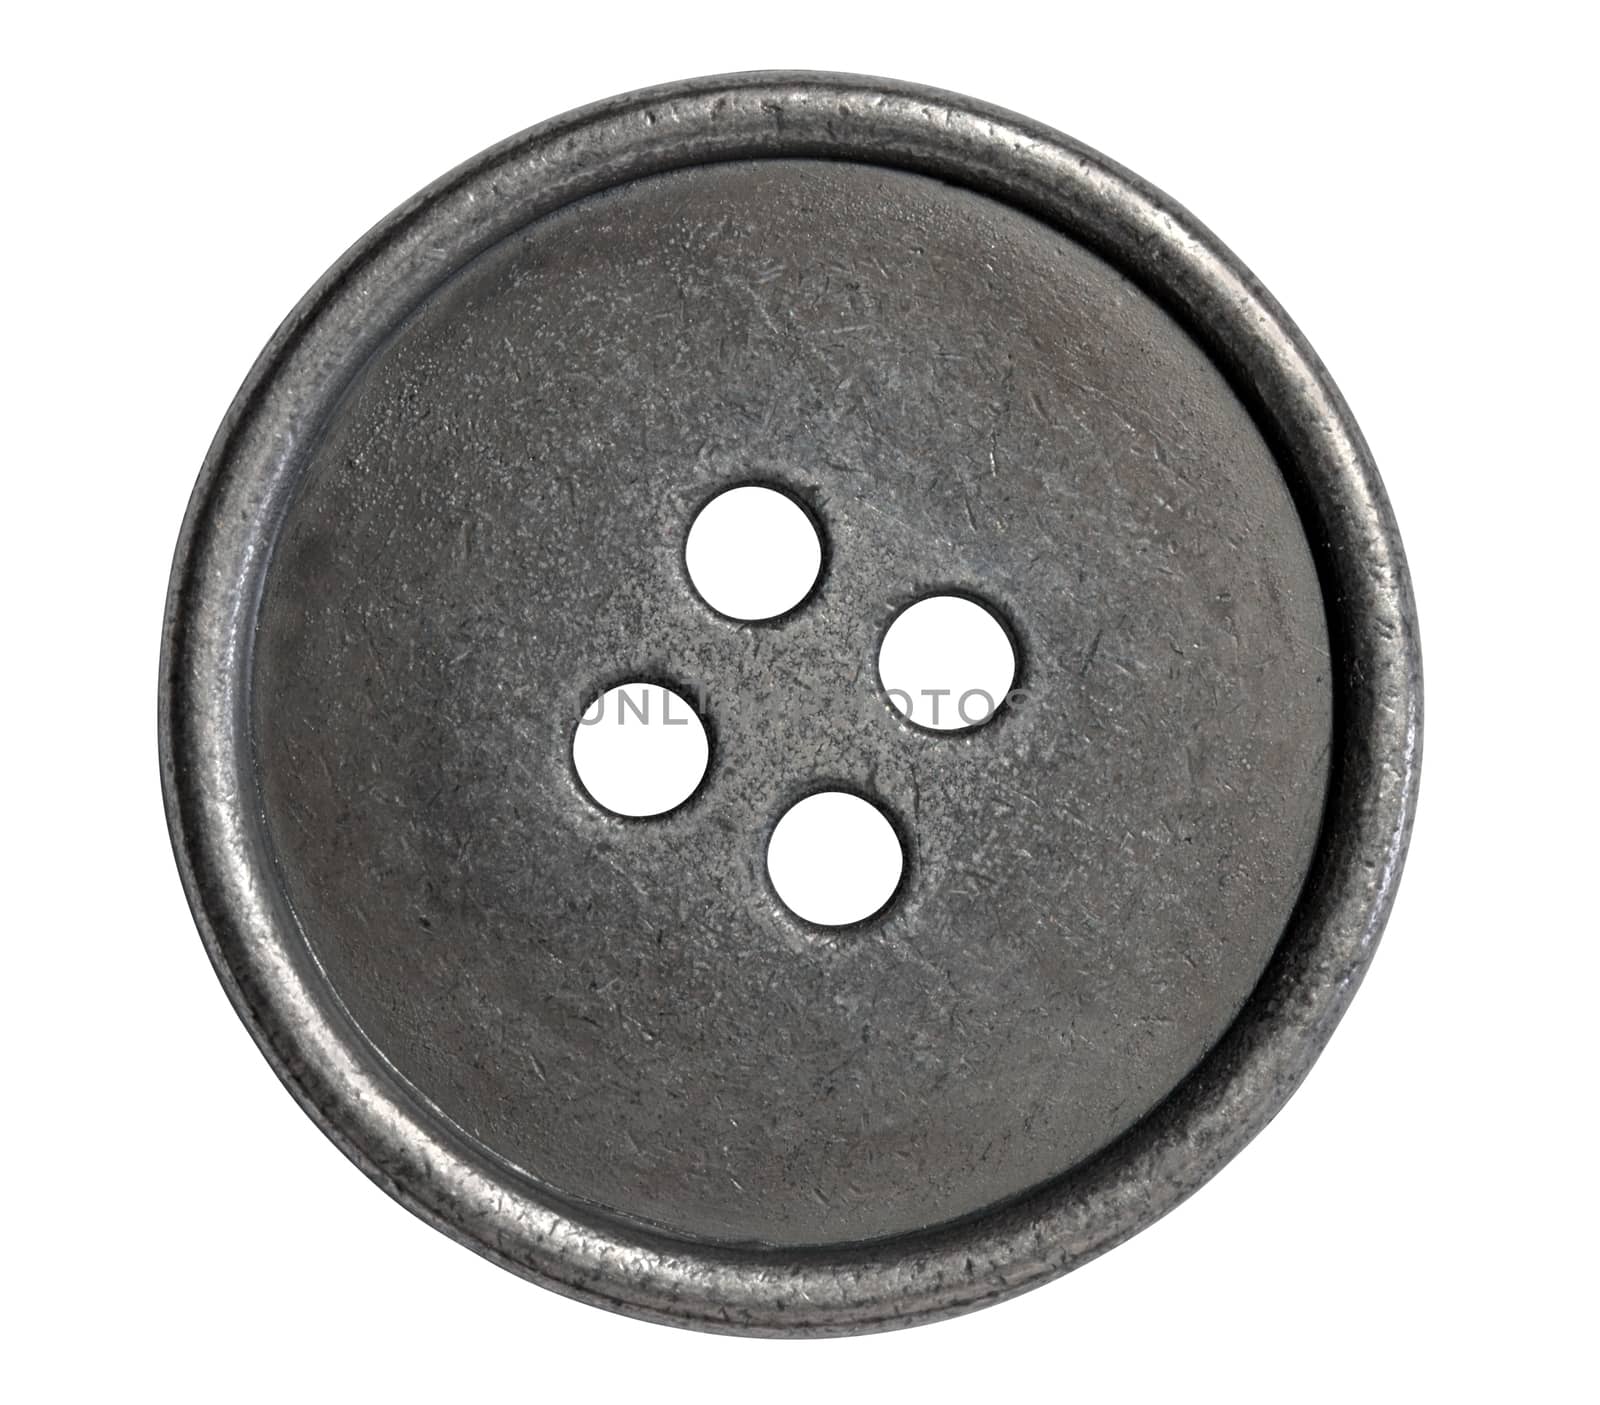 Single metal button isolated with path on white background.